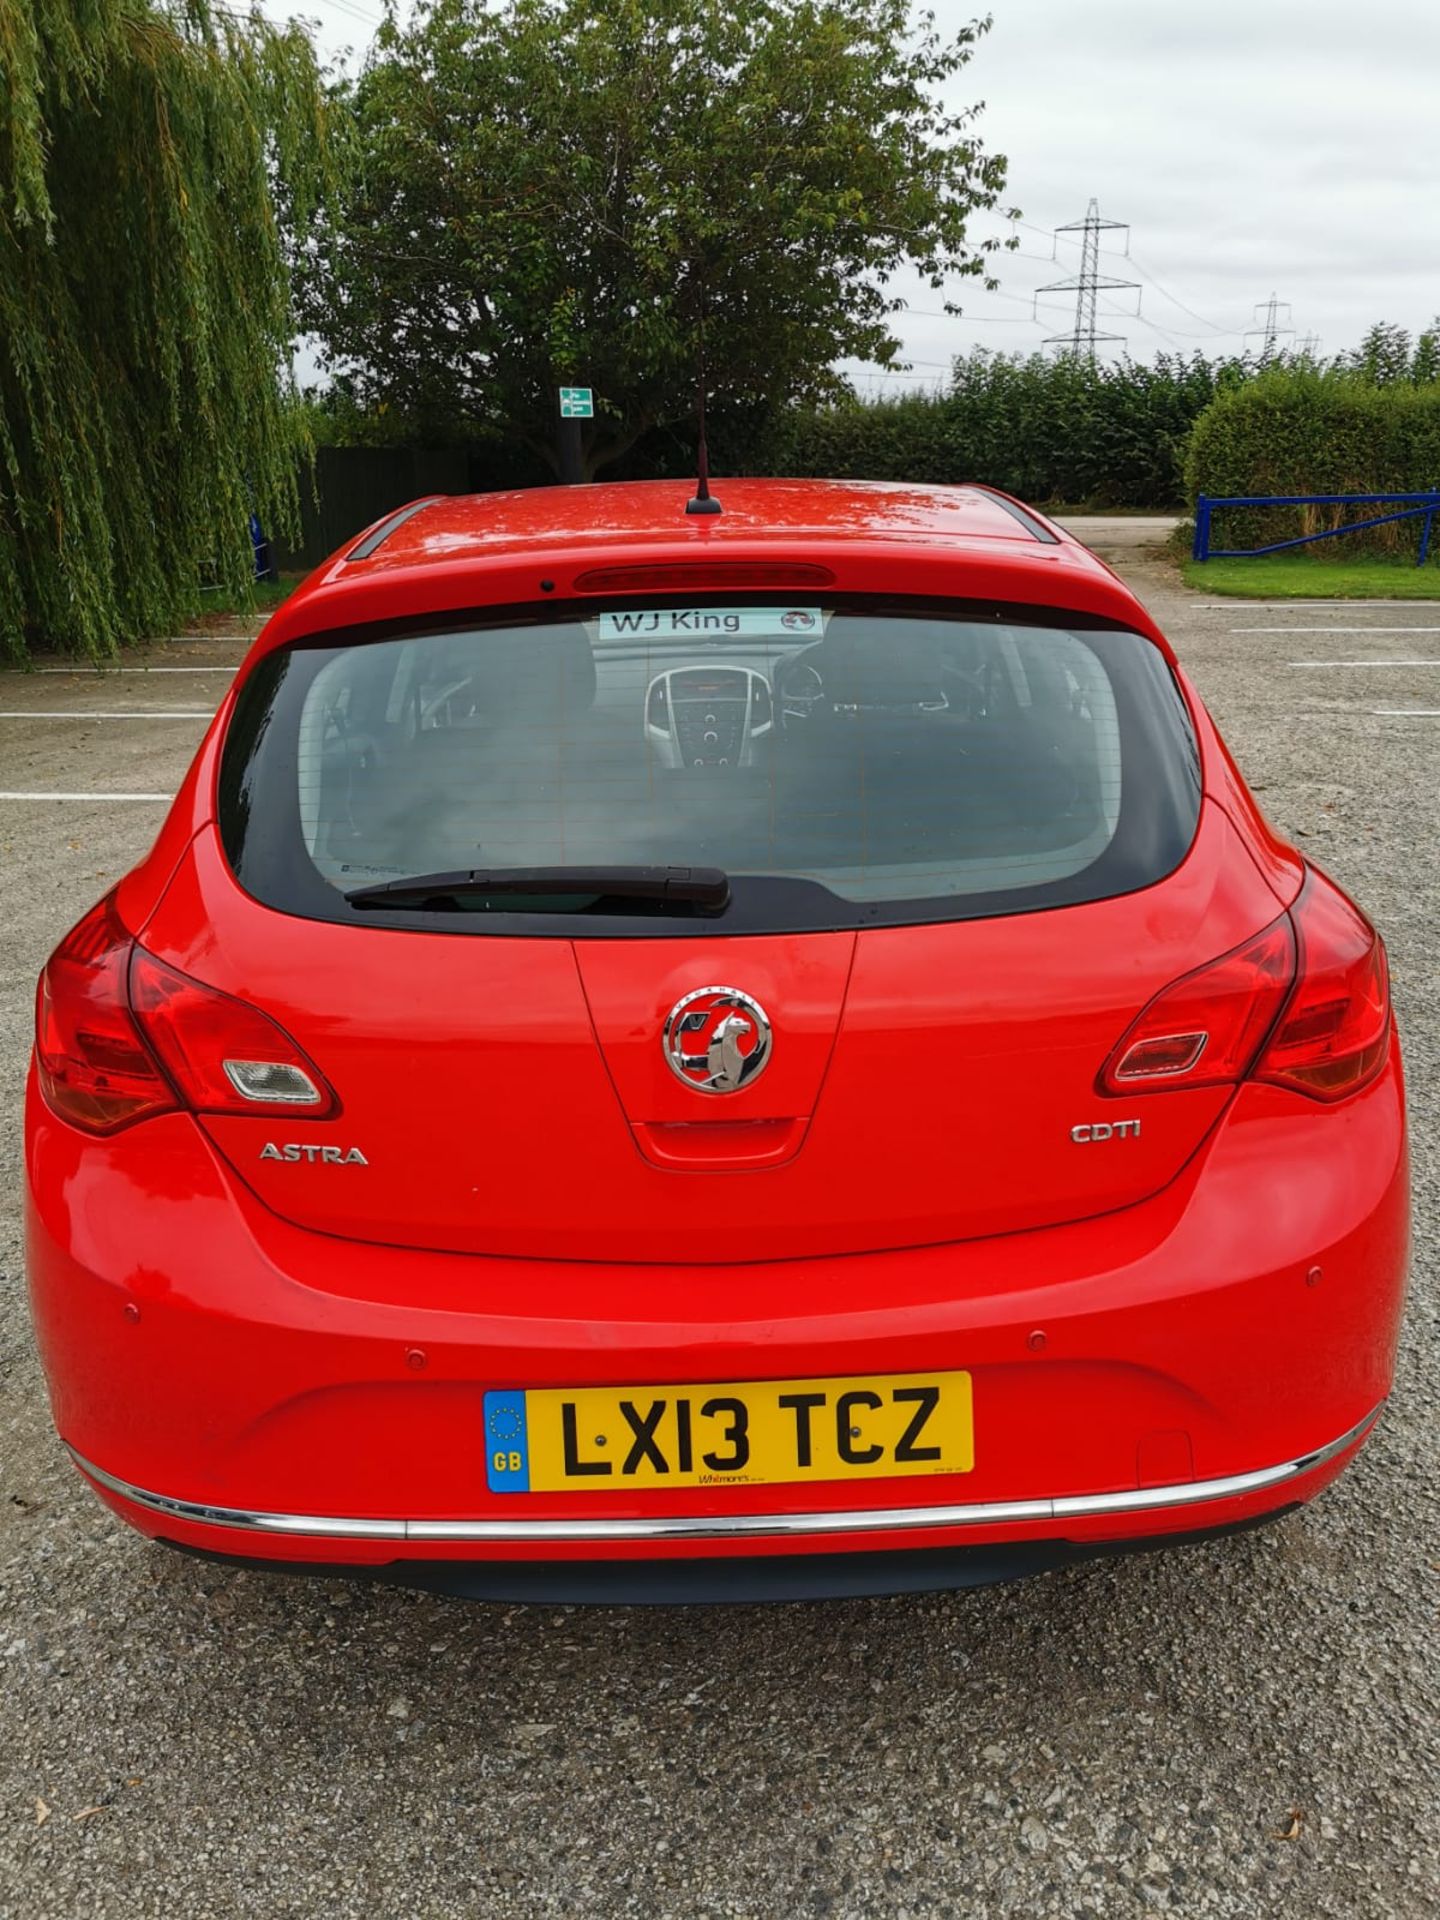 2013 VAUXHALL ASTRA ENERGY CDTI RED HATCHBACK, 1.7 DIESEL, SHOWING 2 PREVIOUS KEEPERS - Image 6 of 18